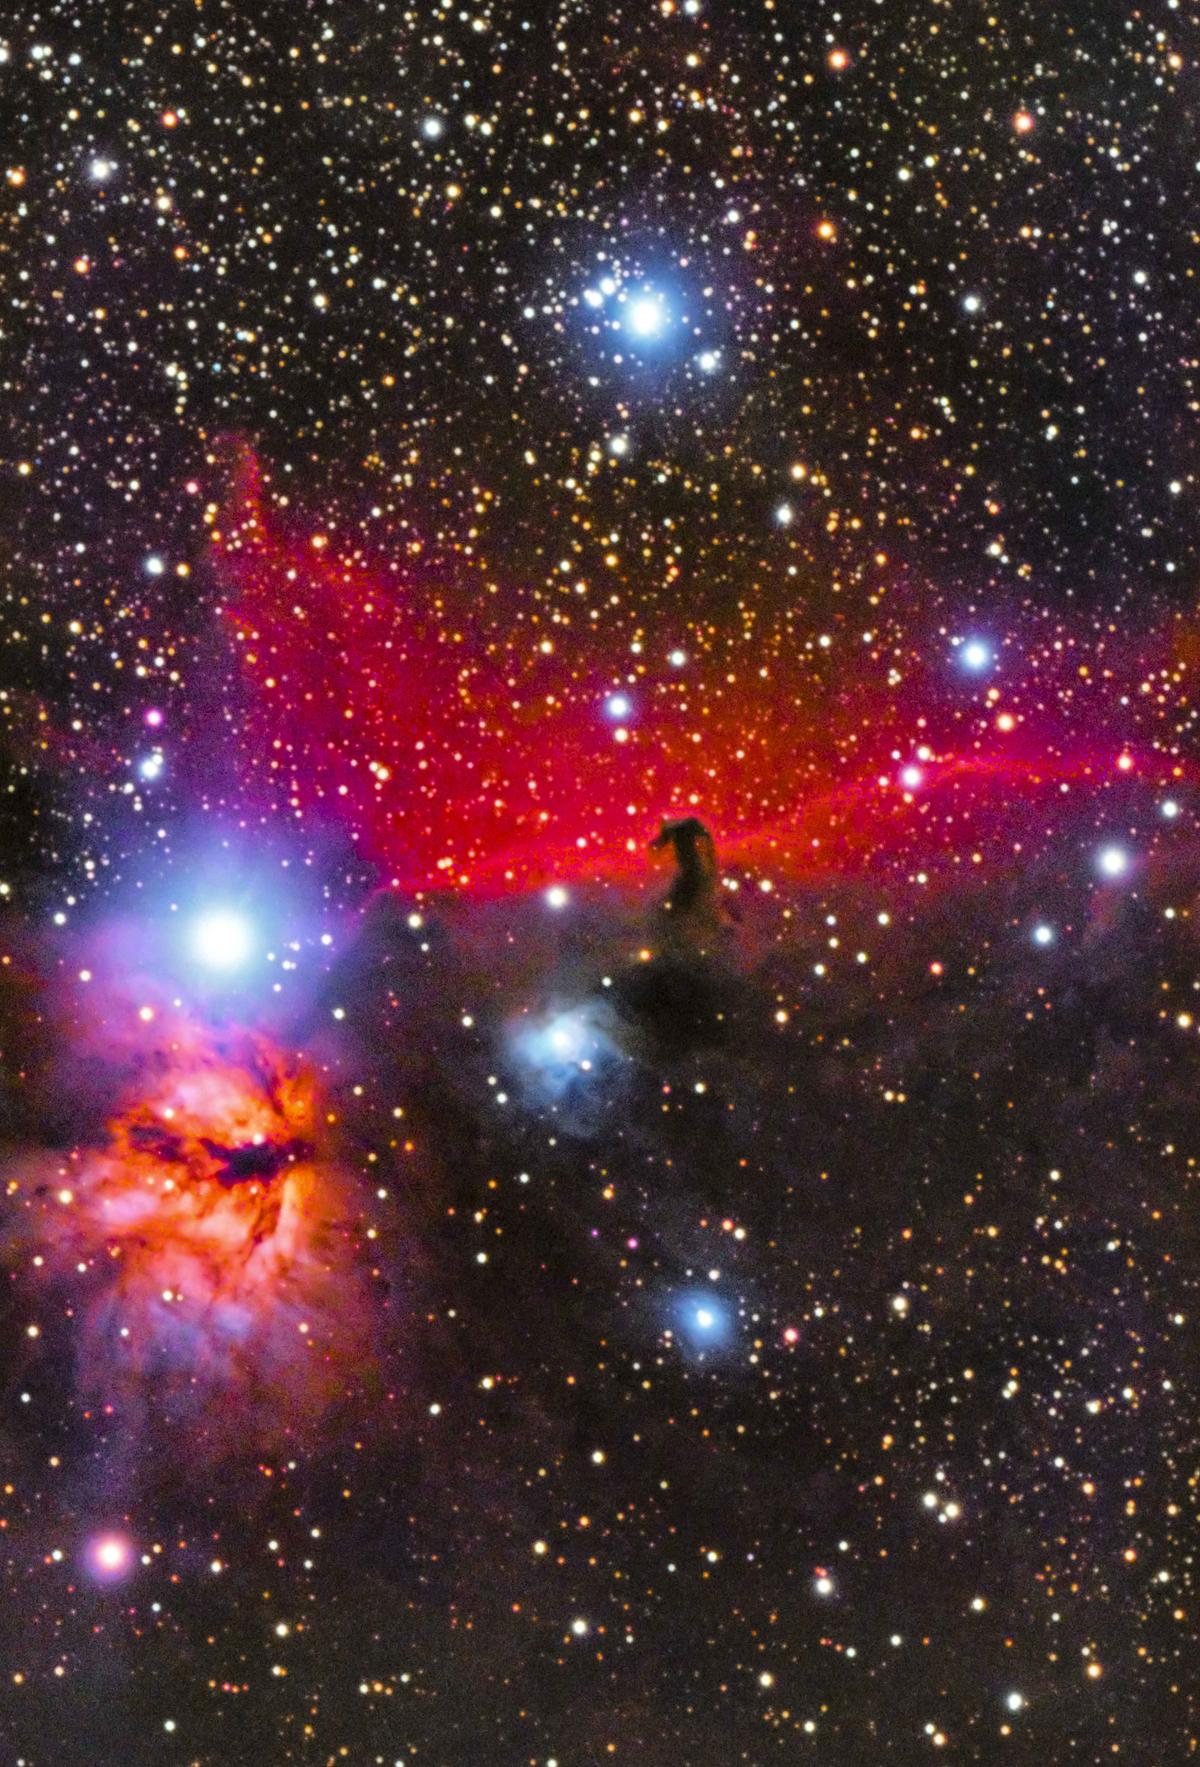 The Horsehead (the Dark Nebula known as Barnard 33) and Flame Nebulas are a group of Nebula located around 1,375 light-years from us, which are all within the Orion Constellation. (SWNS)